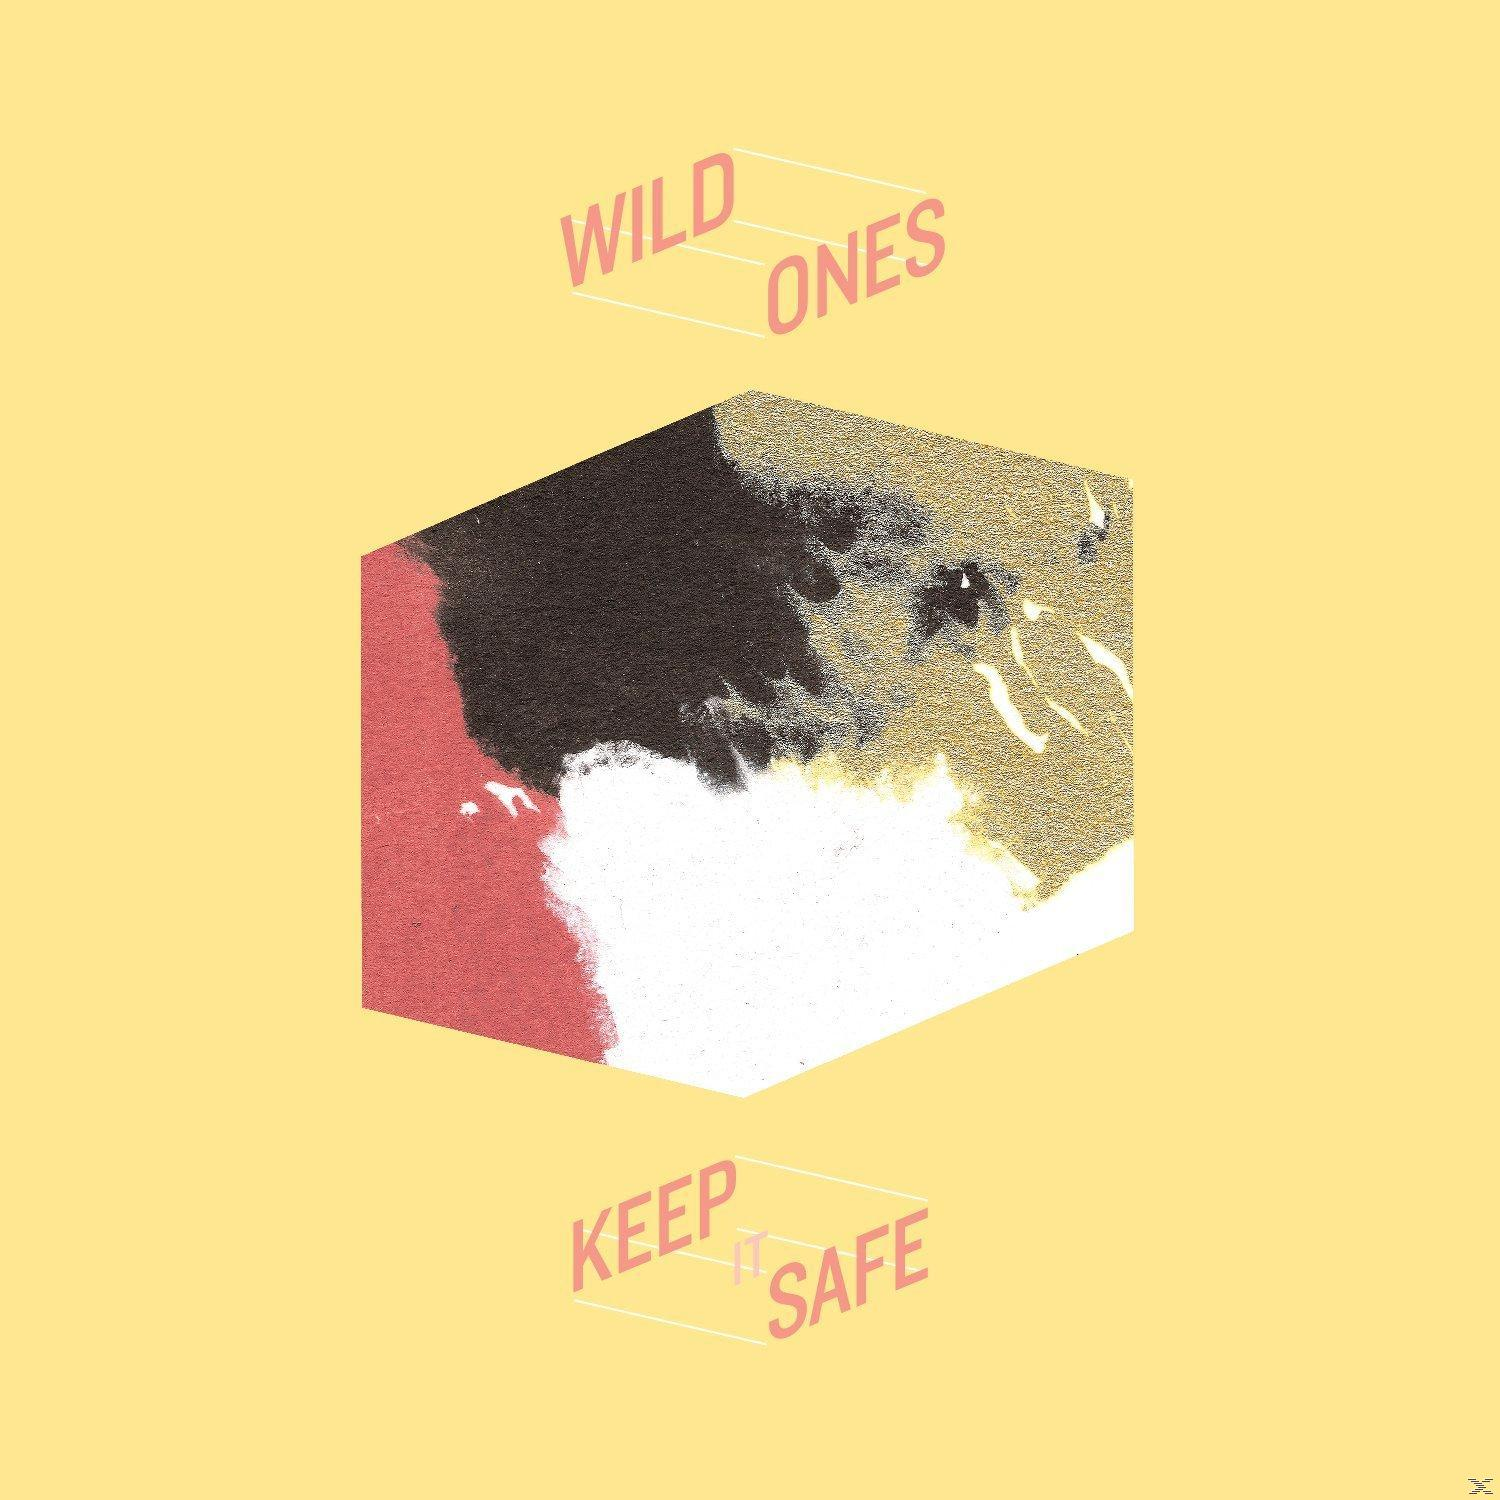 The - Safe It (CD) Ones - Wild Keep